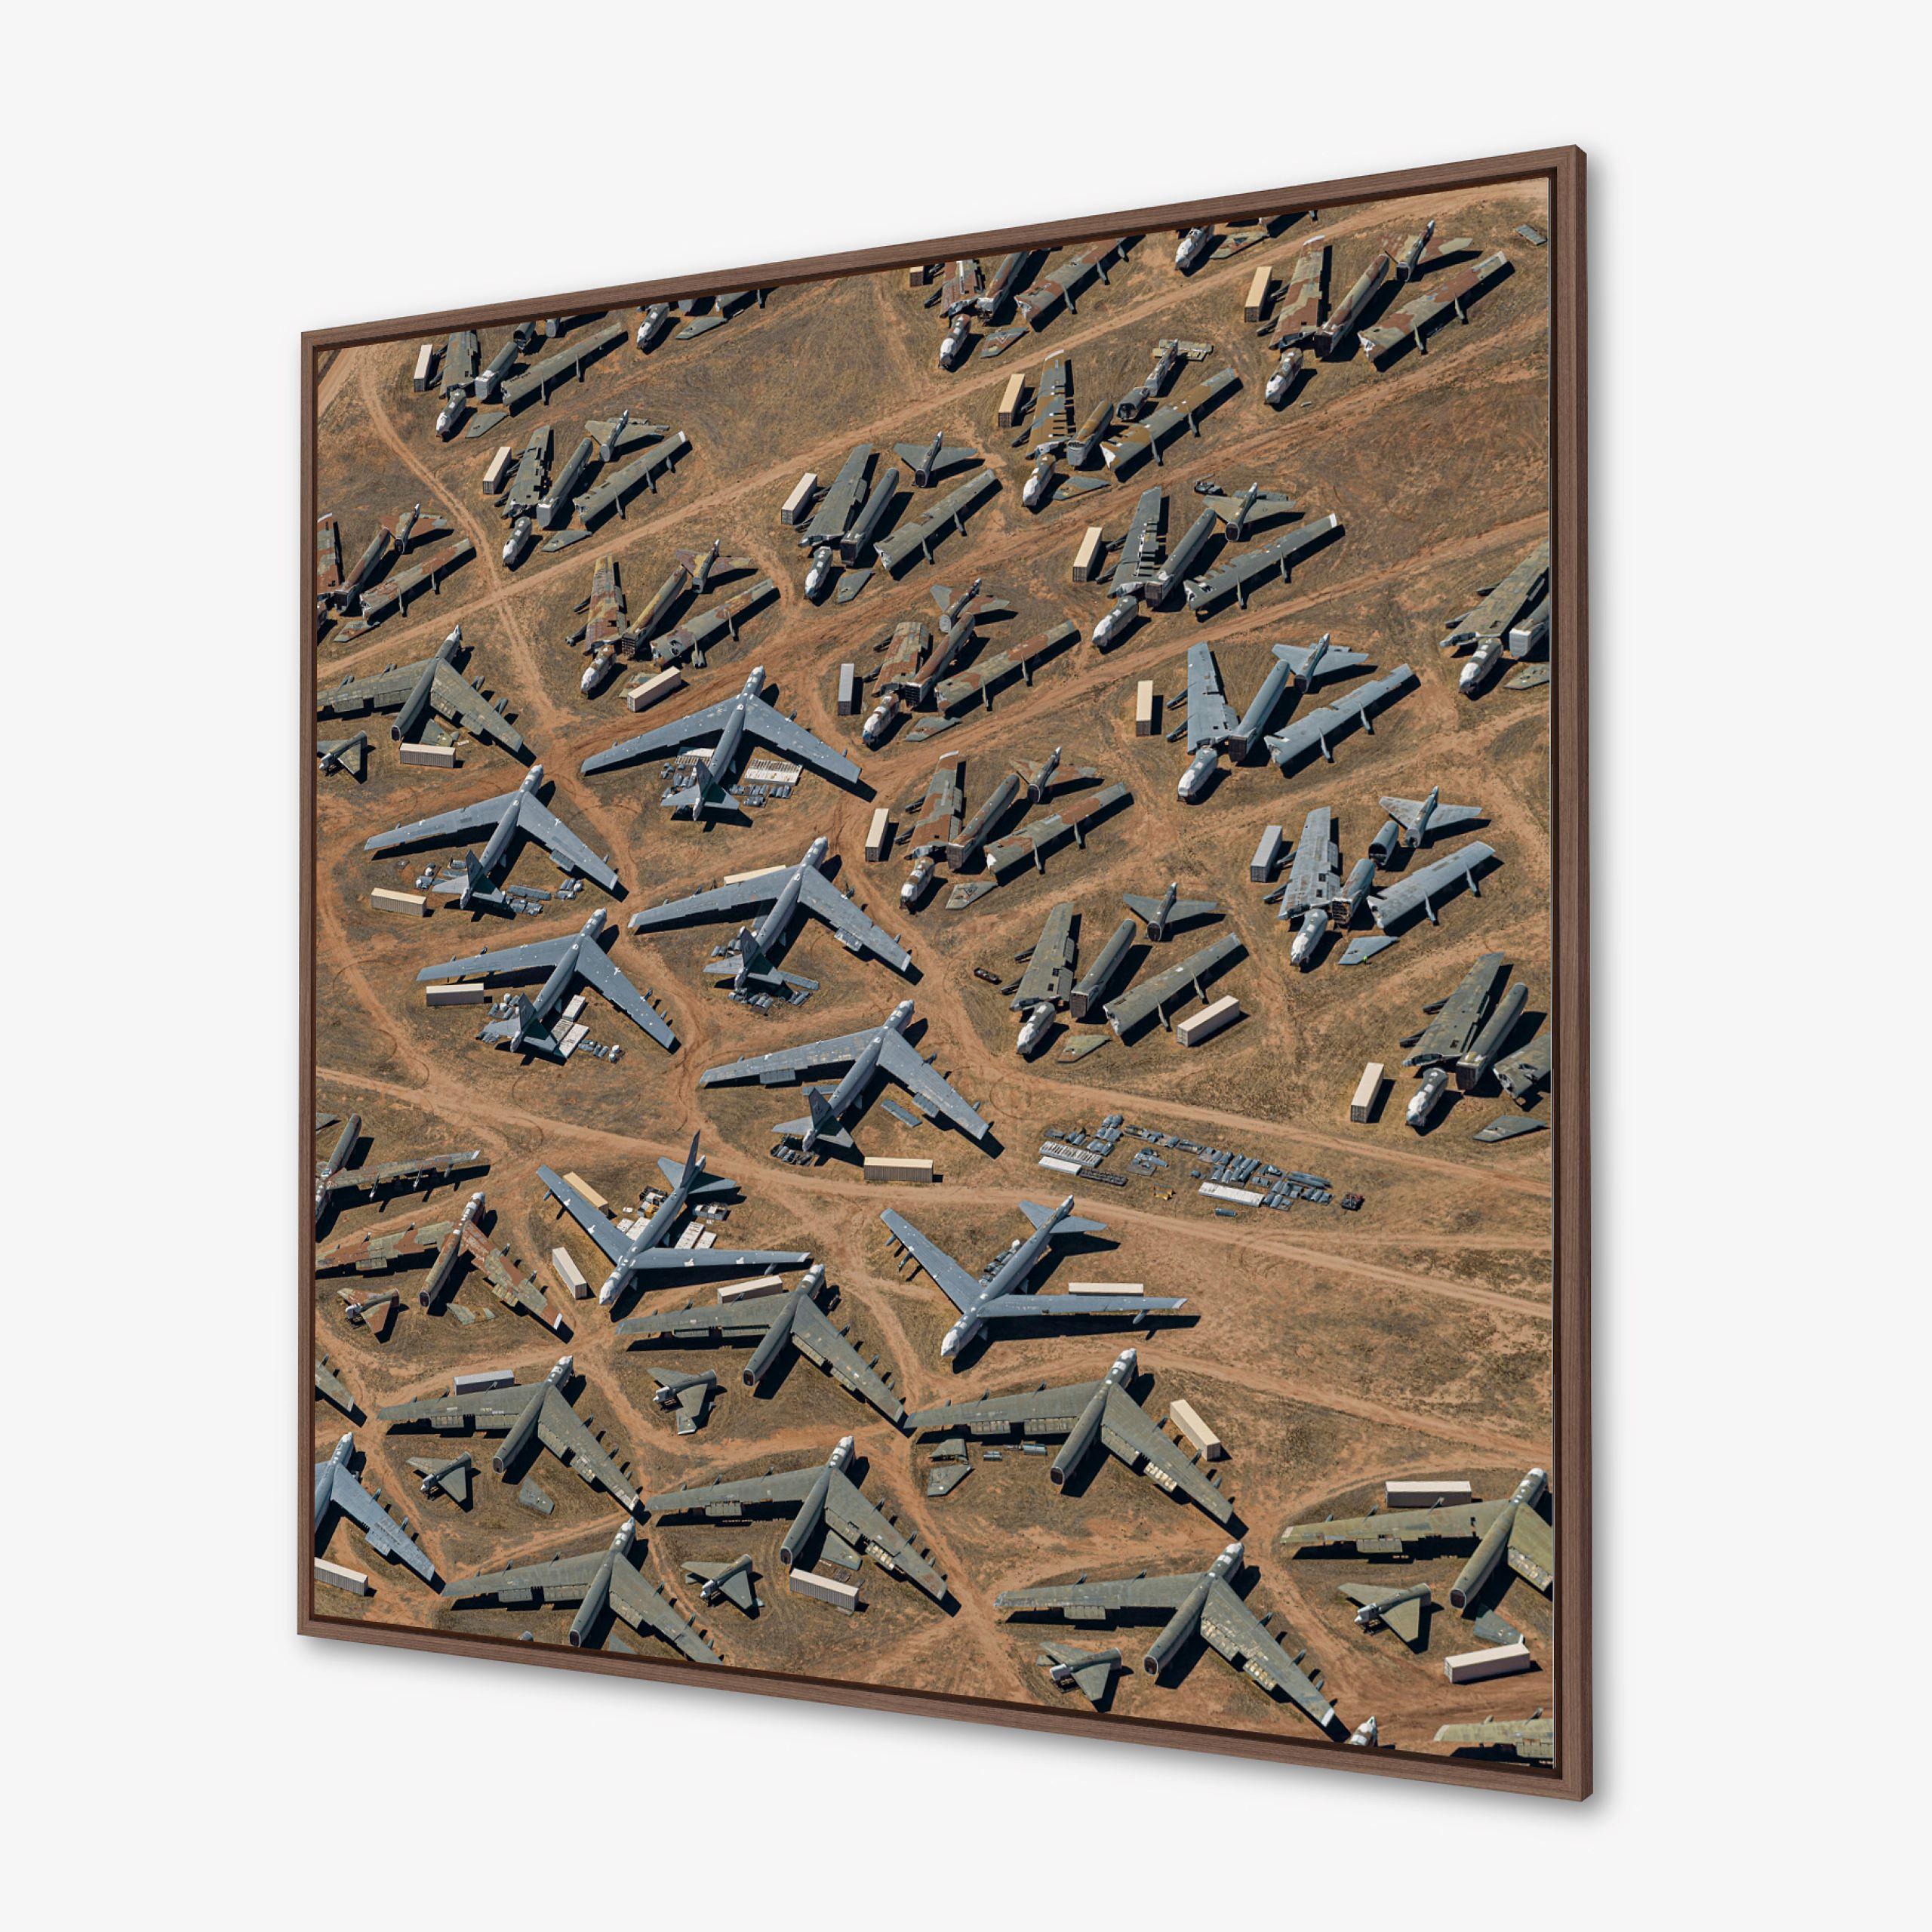 Aerial Views, Boneyard 003 by Bernhard Lang - Aerial photography, planes For Sale 3